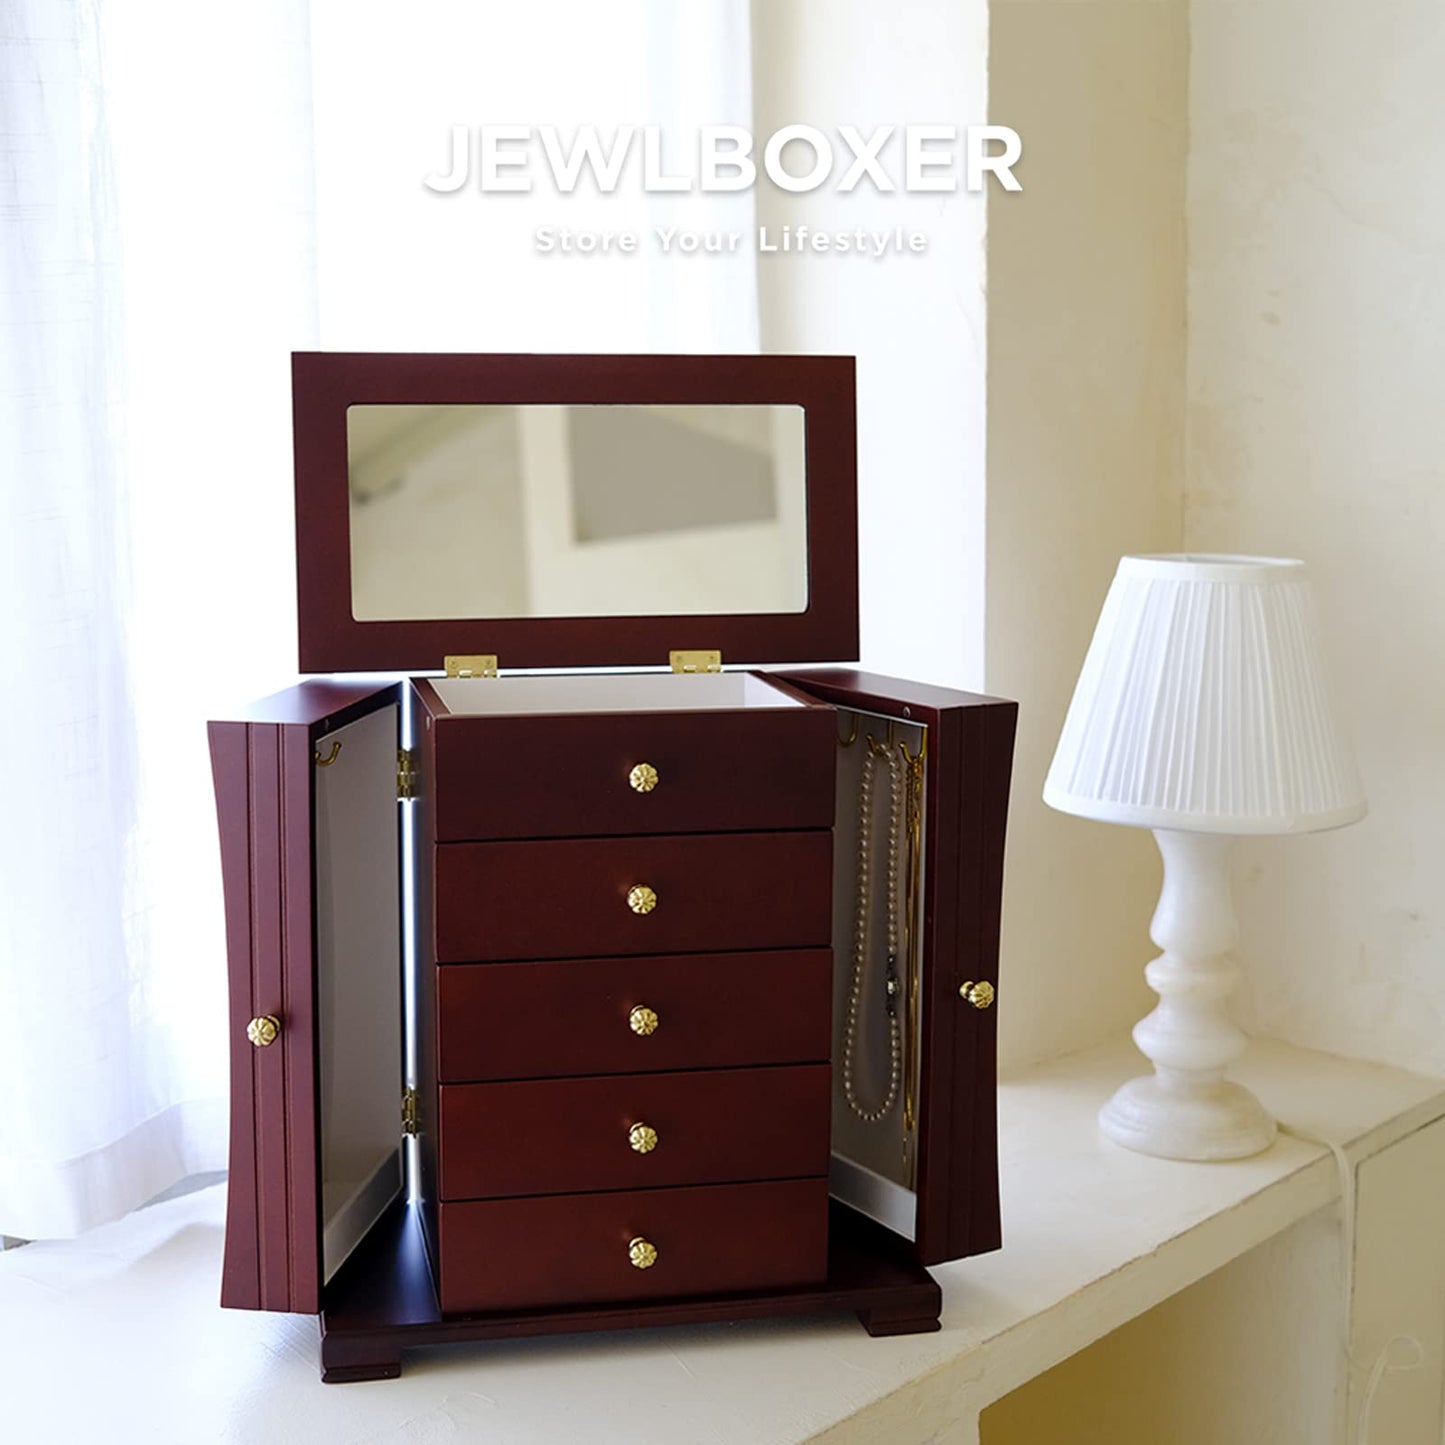 JEWLBOXER Jewelry Organizer –Tower Style Wooden Jewelry Box with 4 Drawers and Large Mirror, Ring, Necklace, and Earring Organizer,brown,walnut